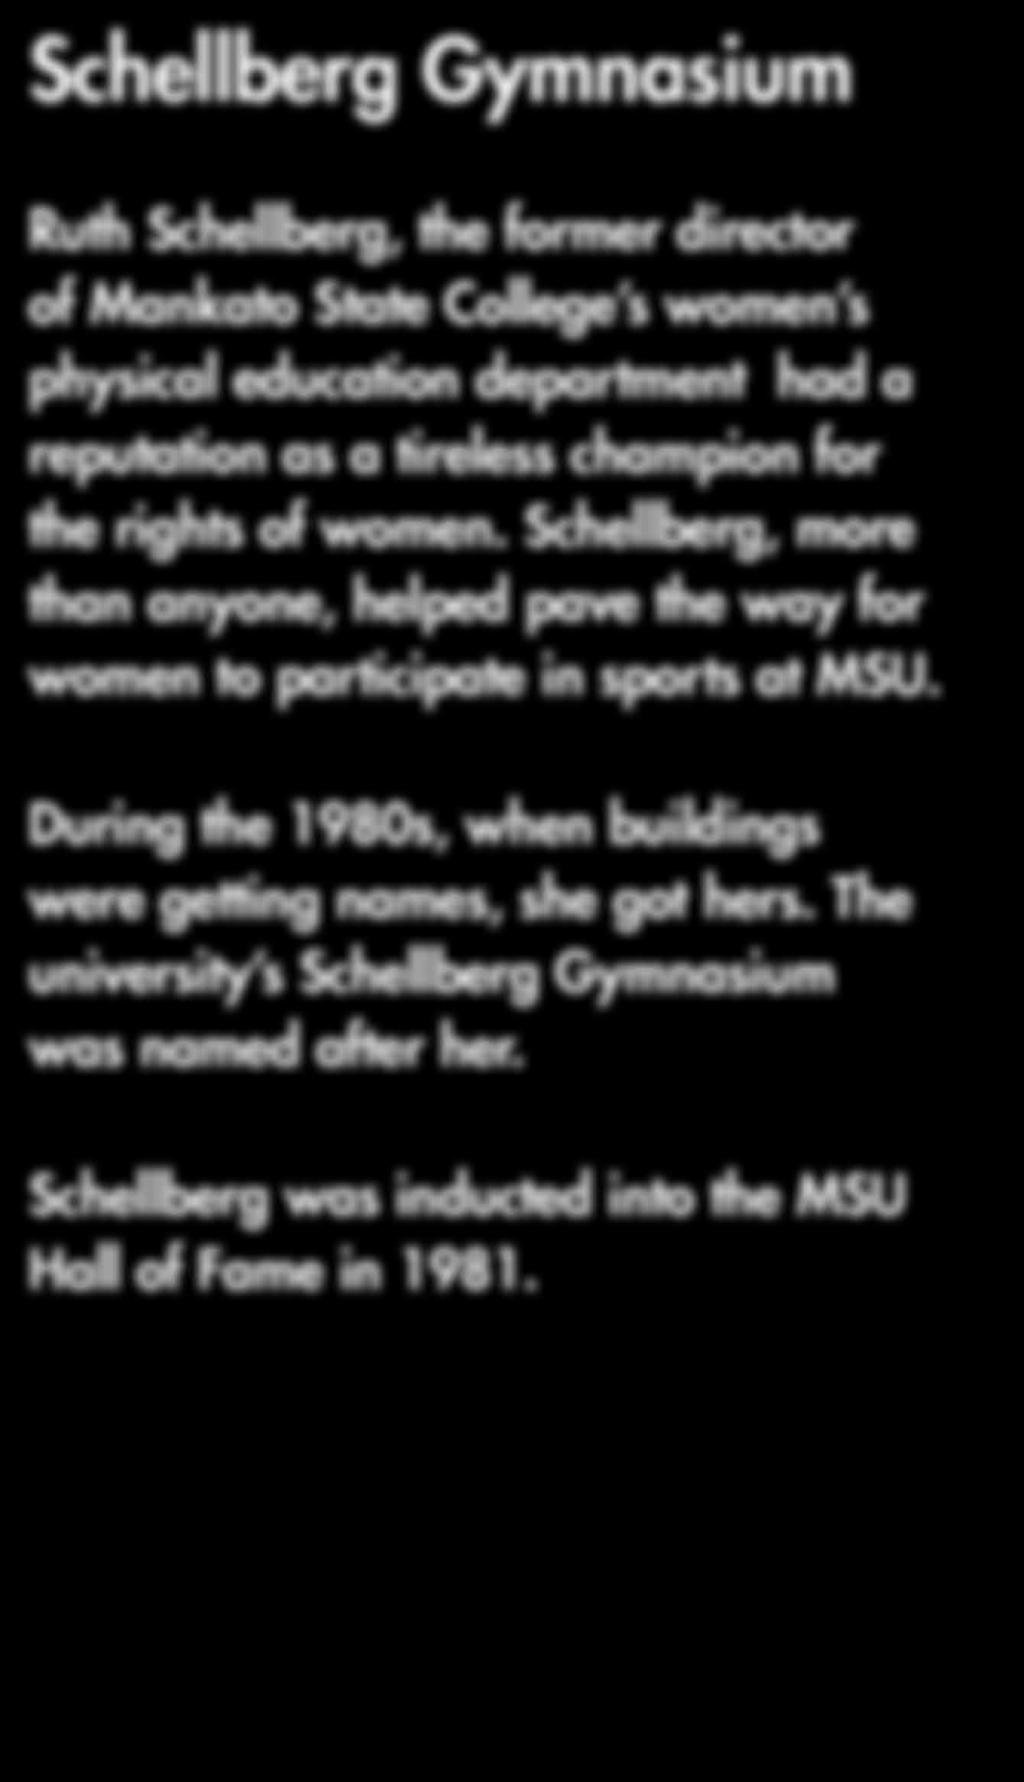 Schellberg Gymnasium Ruth Schellberg, the former director of Mankato State College s women s physical education department had a reputation as a tireless champion for the rights of women.